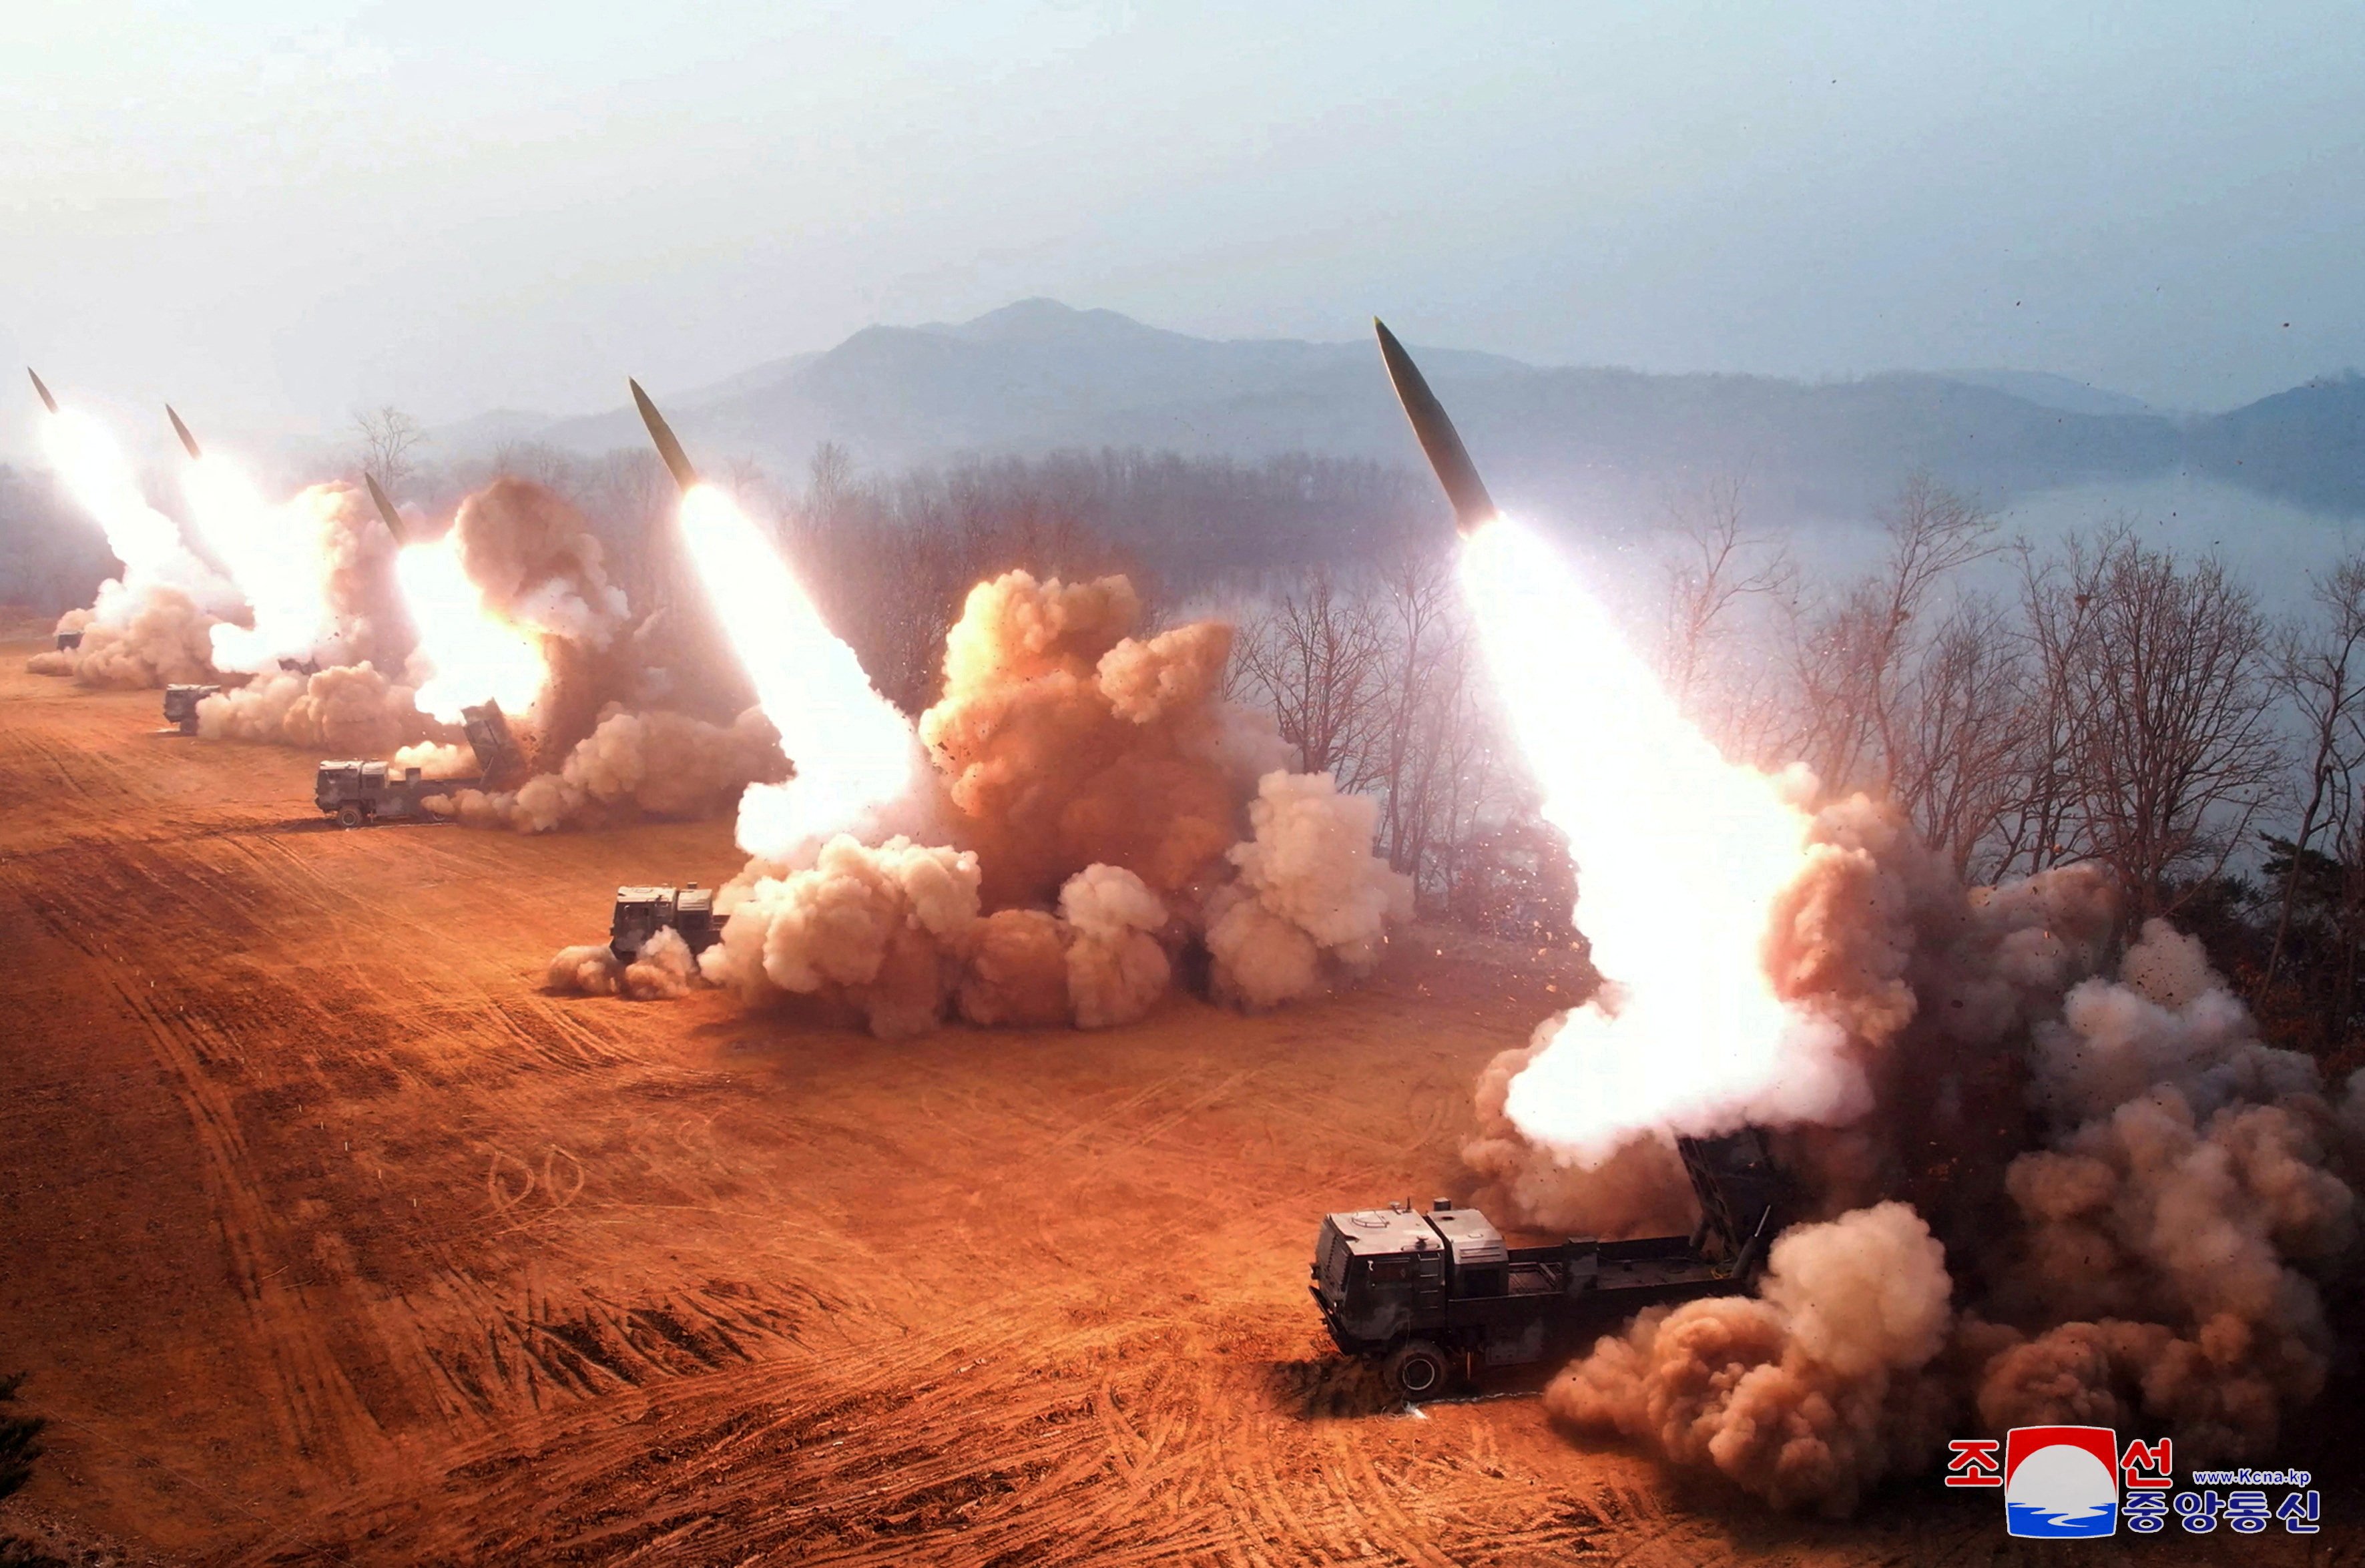 A “fire assault” drill at an undisclosed location in North Korea on March 10. Leader Kim Jong-un has called for the North’s “war deterrent” to be used in a “more effective, powerful and offensive” way. Photo: KCNA via Reuters